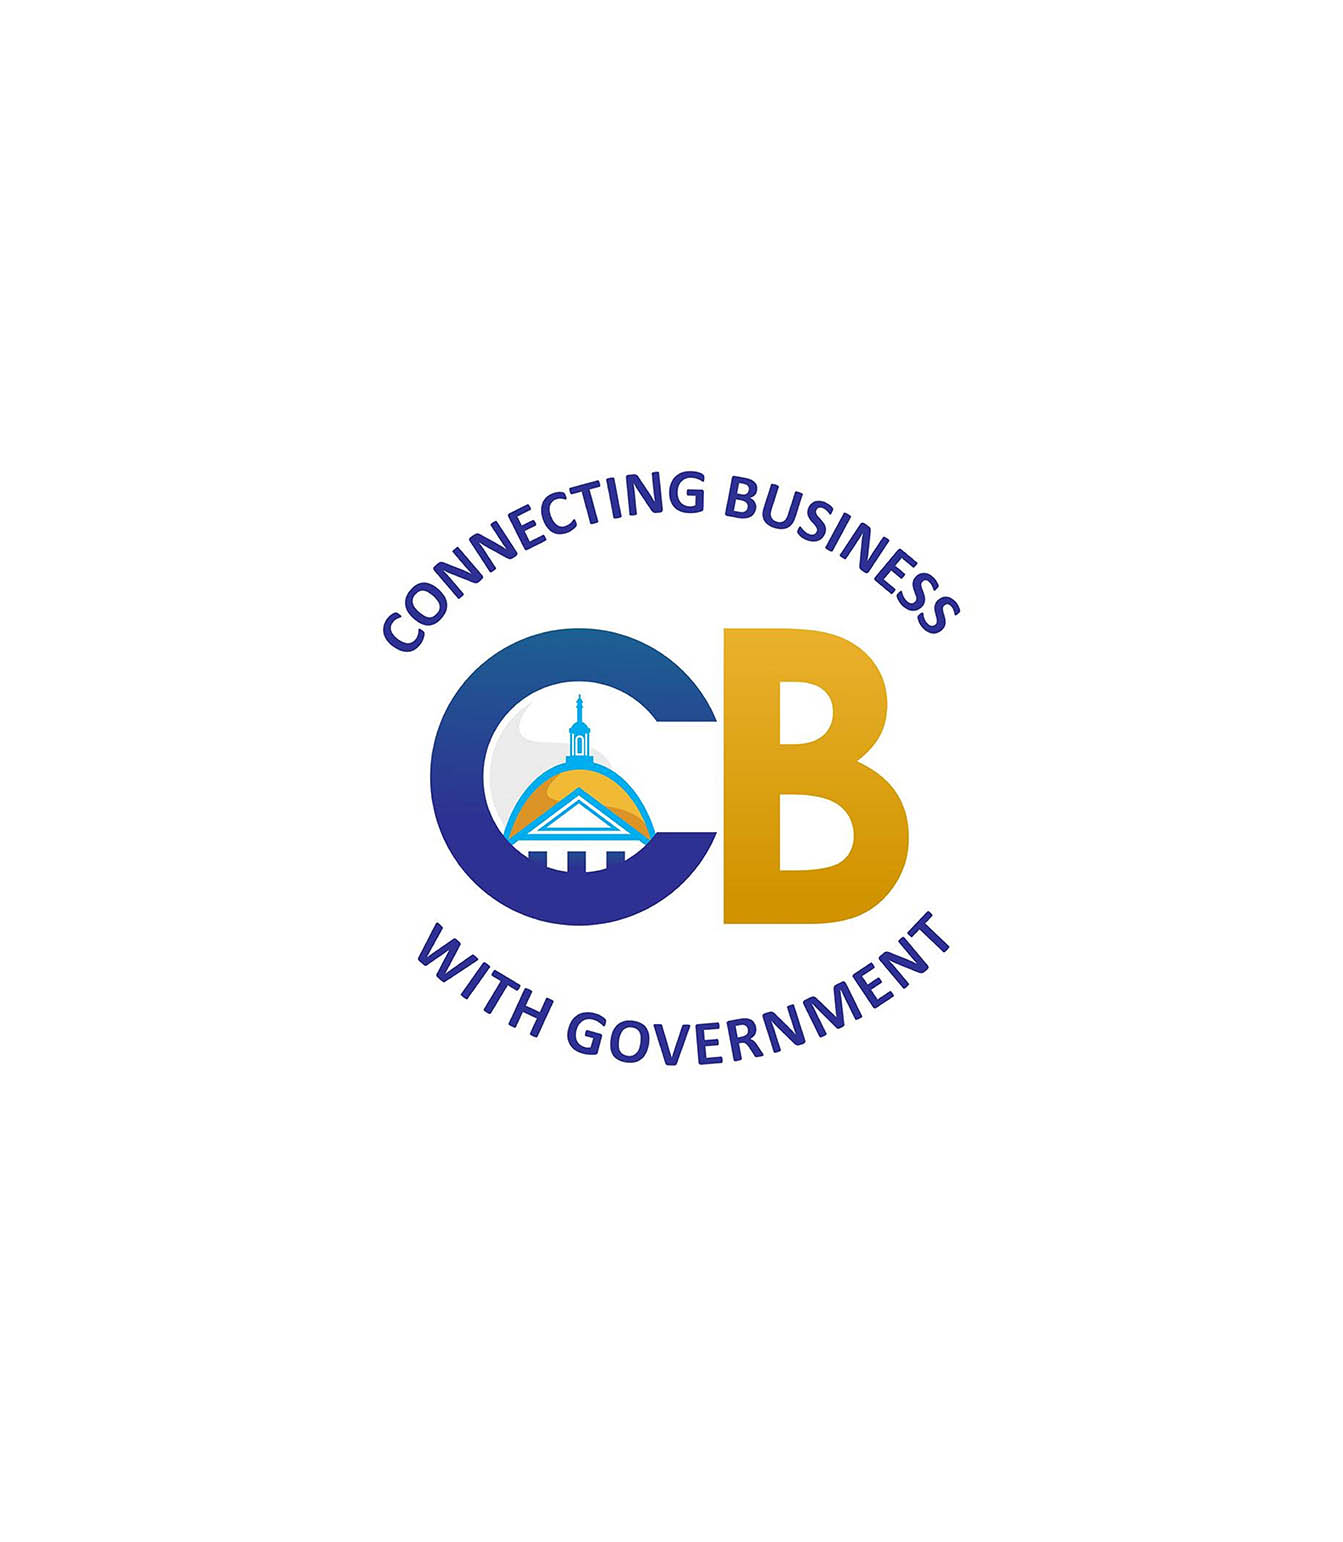 Connecting Business with Government